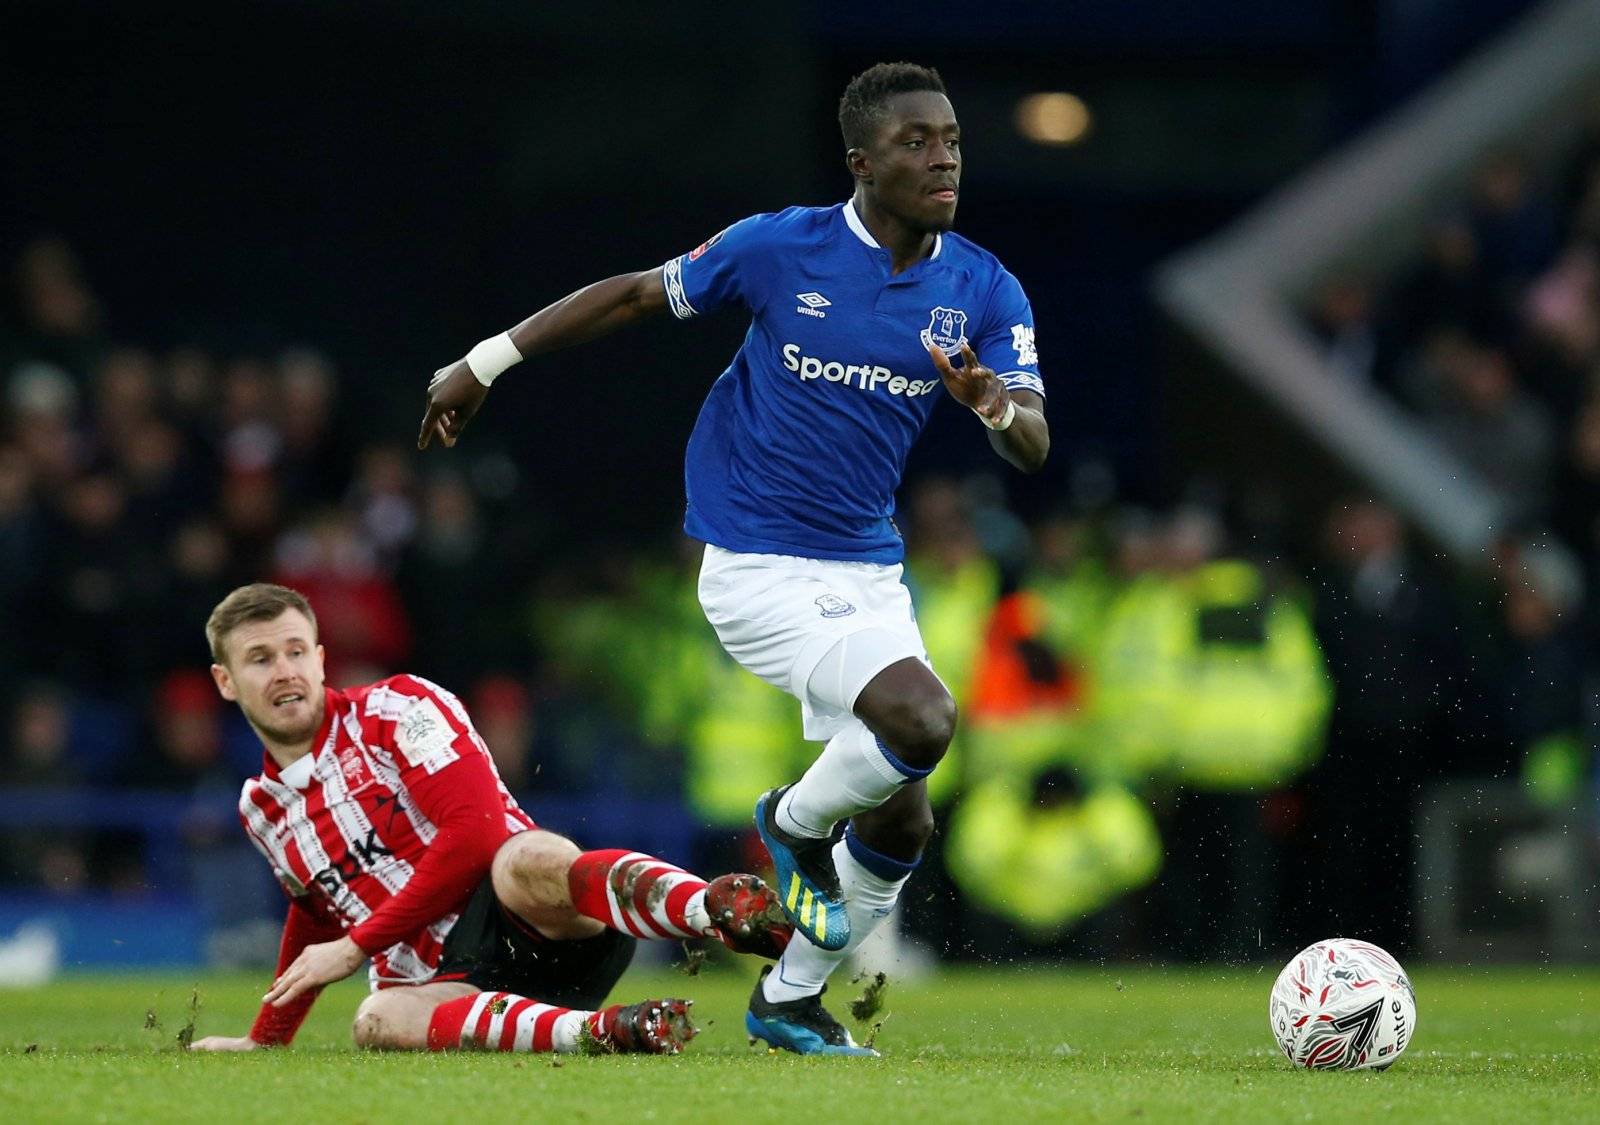 Everton: Fans rue absence of Idrissa Gueye from their midfield following Liverpool defeat - Everton